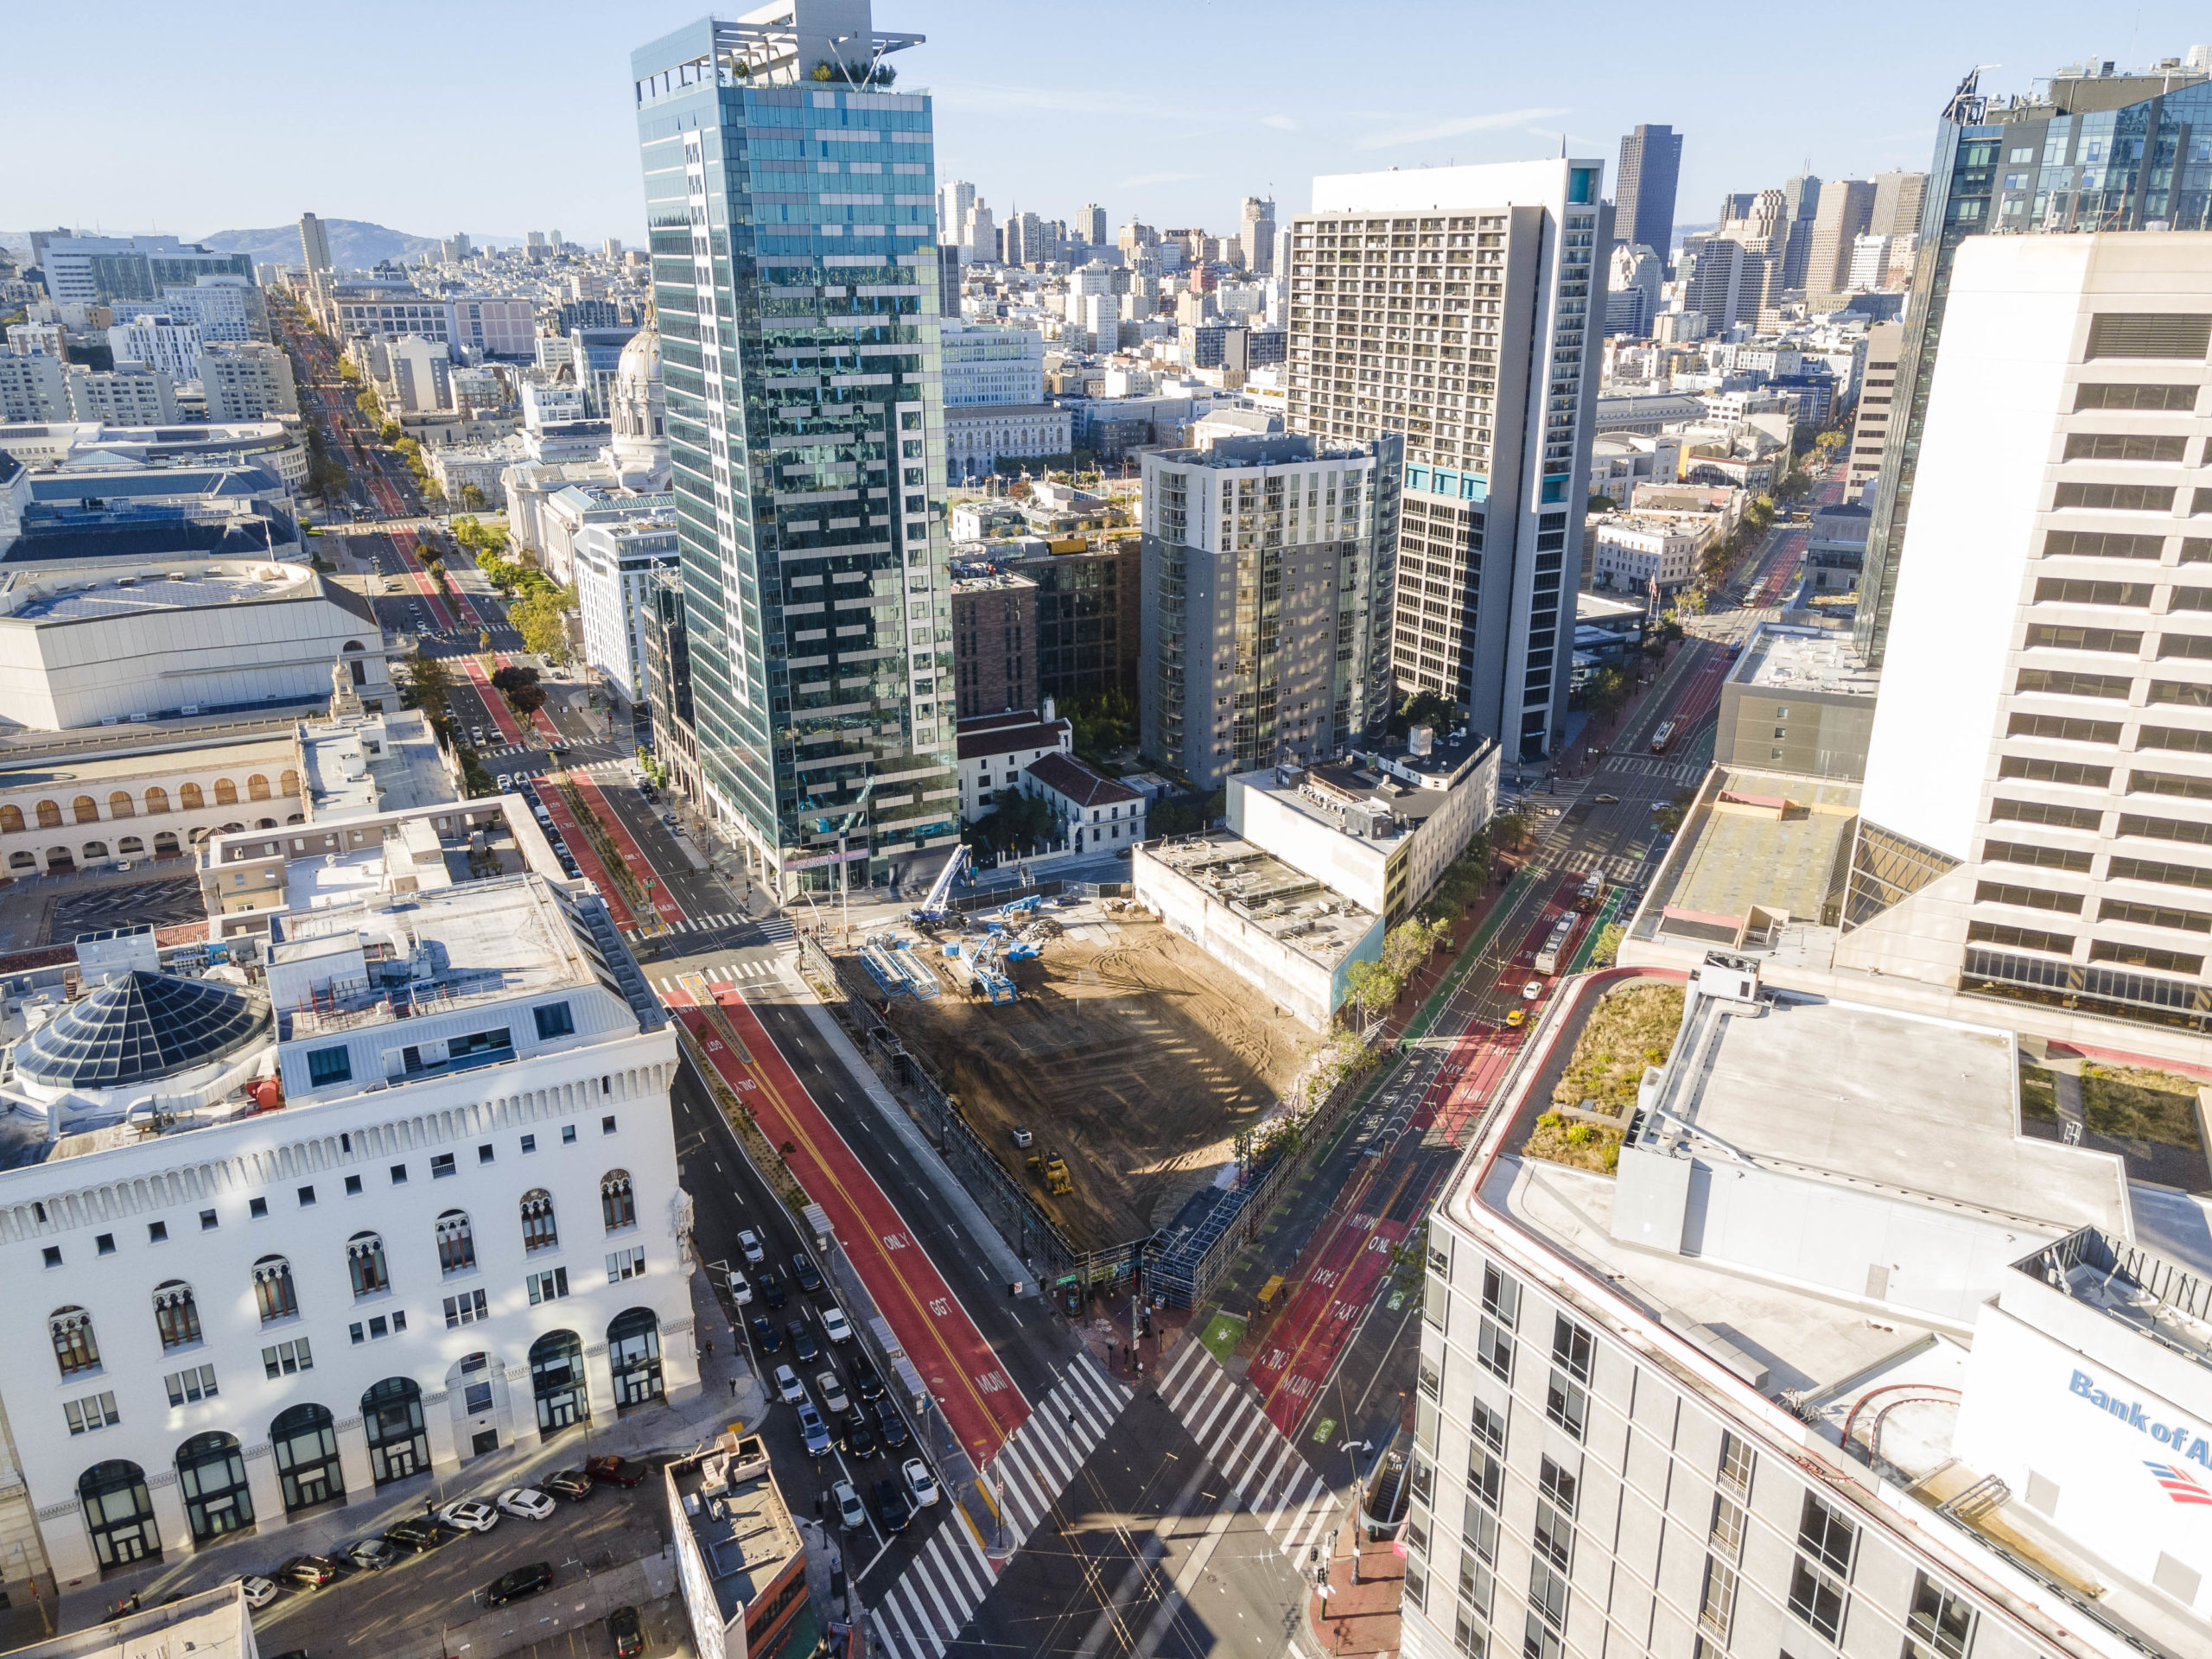 30 Van Ness Avenue aerial perspective, image by Andrew Campbell Nelson